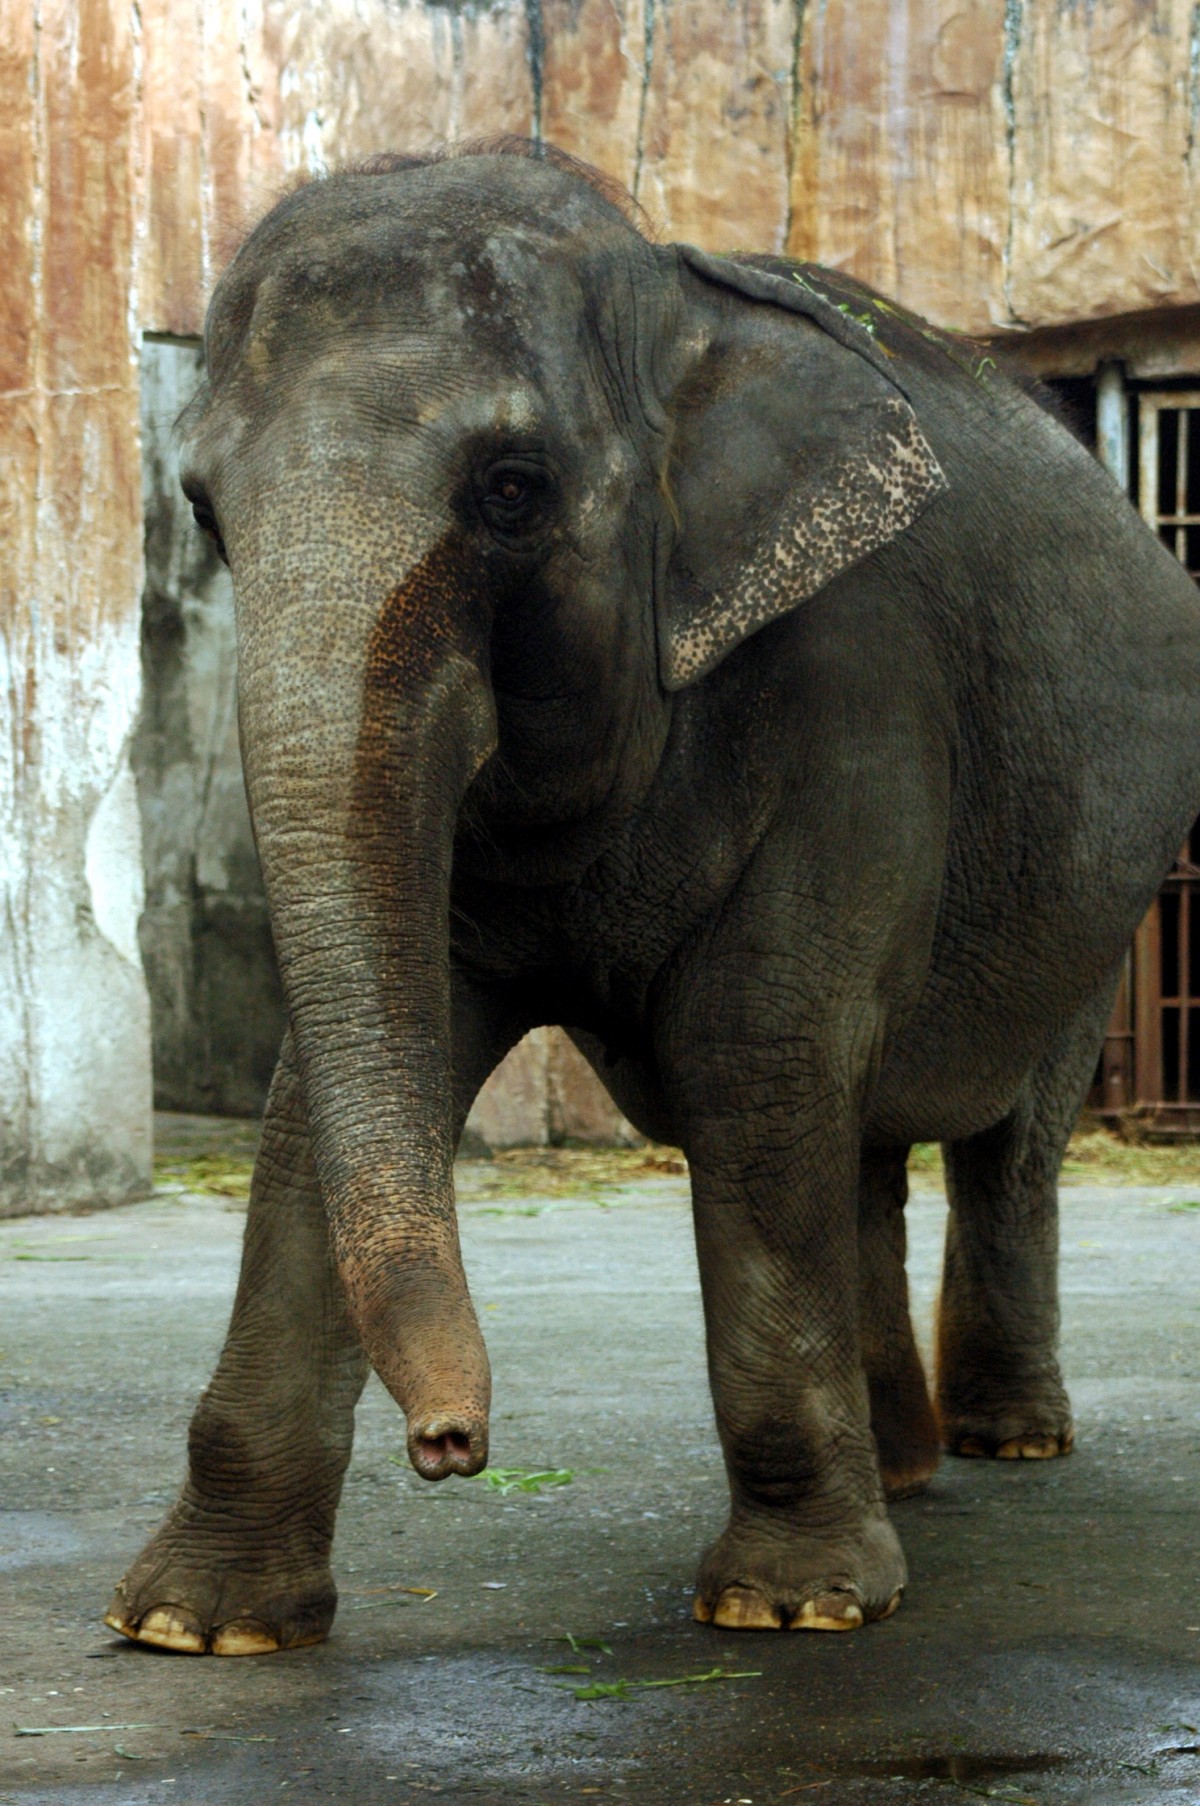 Top 10 Tuesday: Reasons Why Elephants Do Not Belong in Zoos